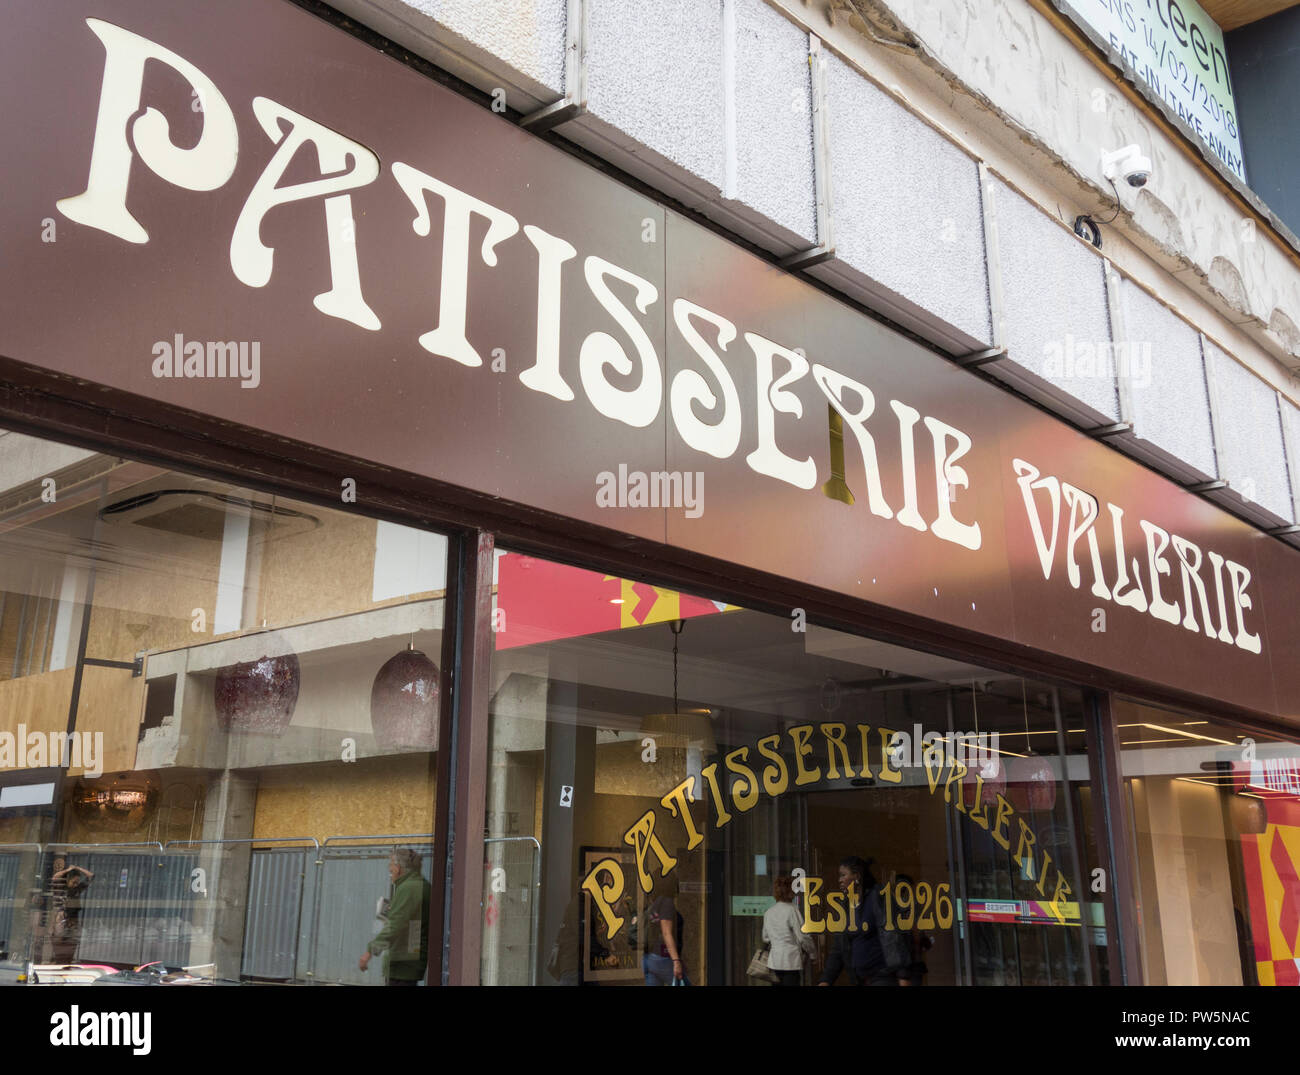 London, England, UK. 12 October, 2018.  Patisserie Valerie cafe in King's Mall, Hammersmith closed and deserted due to financial uncertainty © Benjamin John/ Alamy Live News. Stock Photo